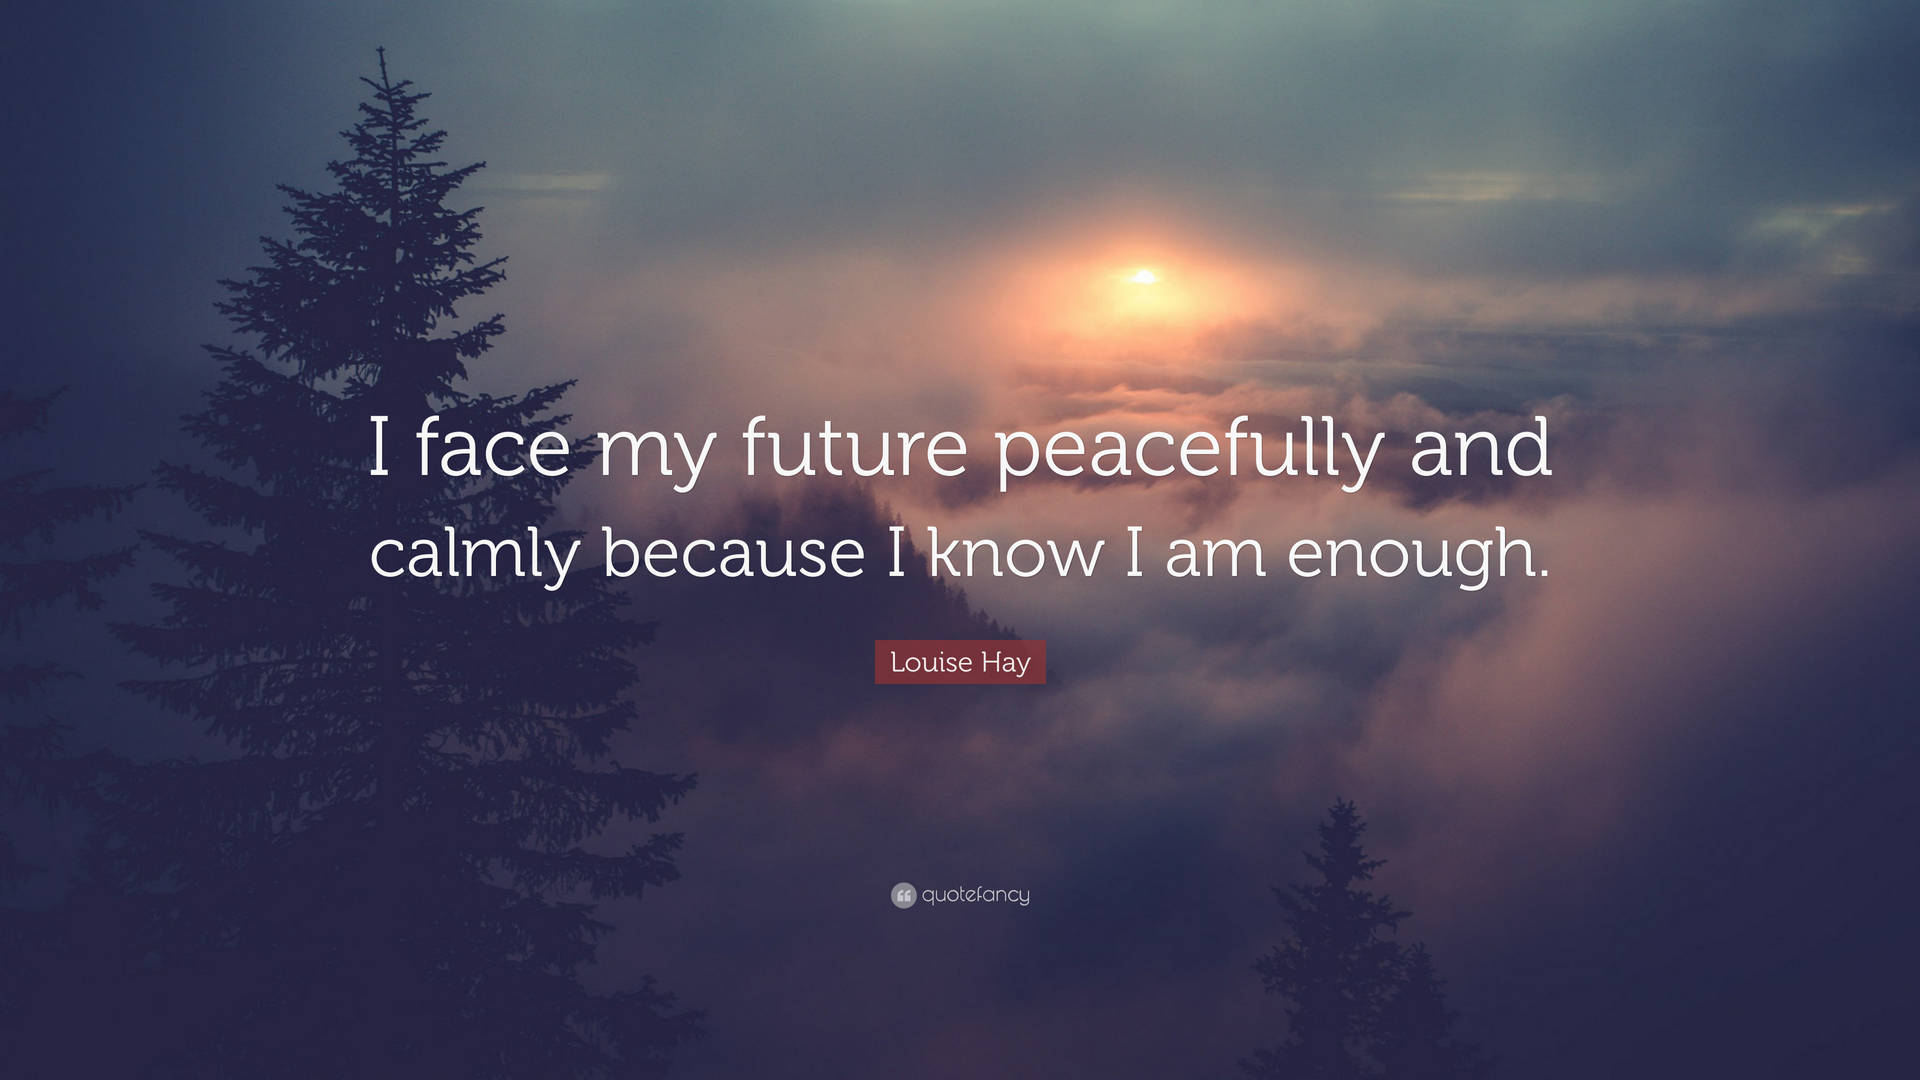 A Quote That Says Face My Future Peacefully And Calmly Because I Know I Am Enough Wallpaper